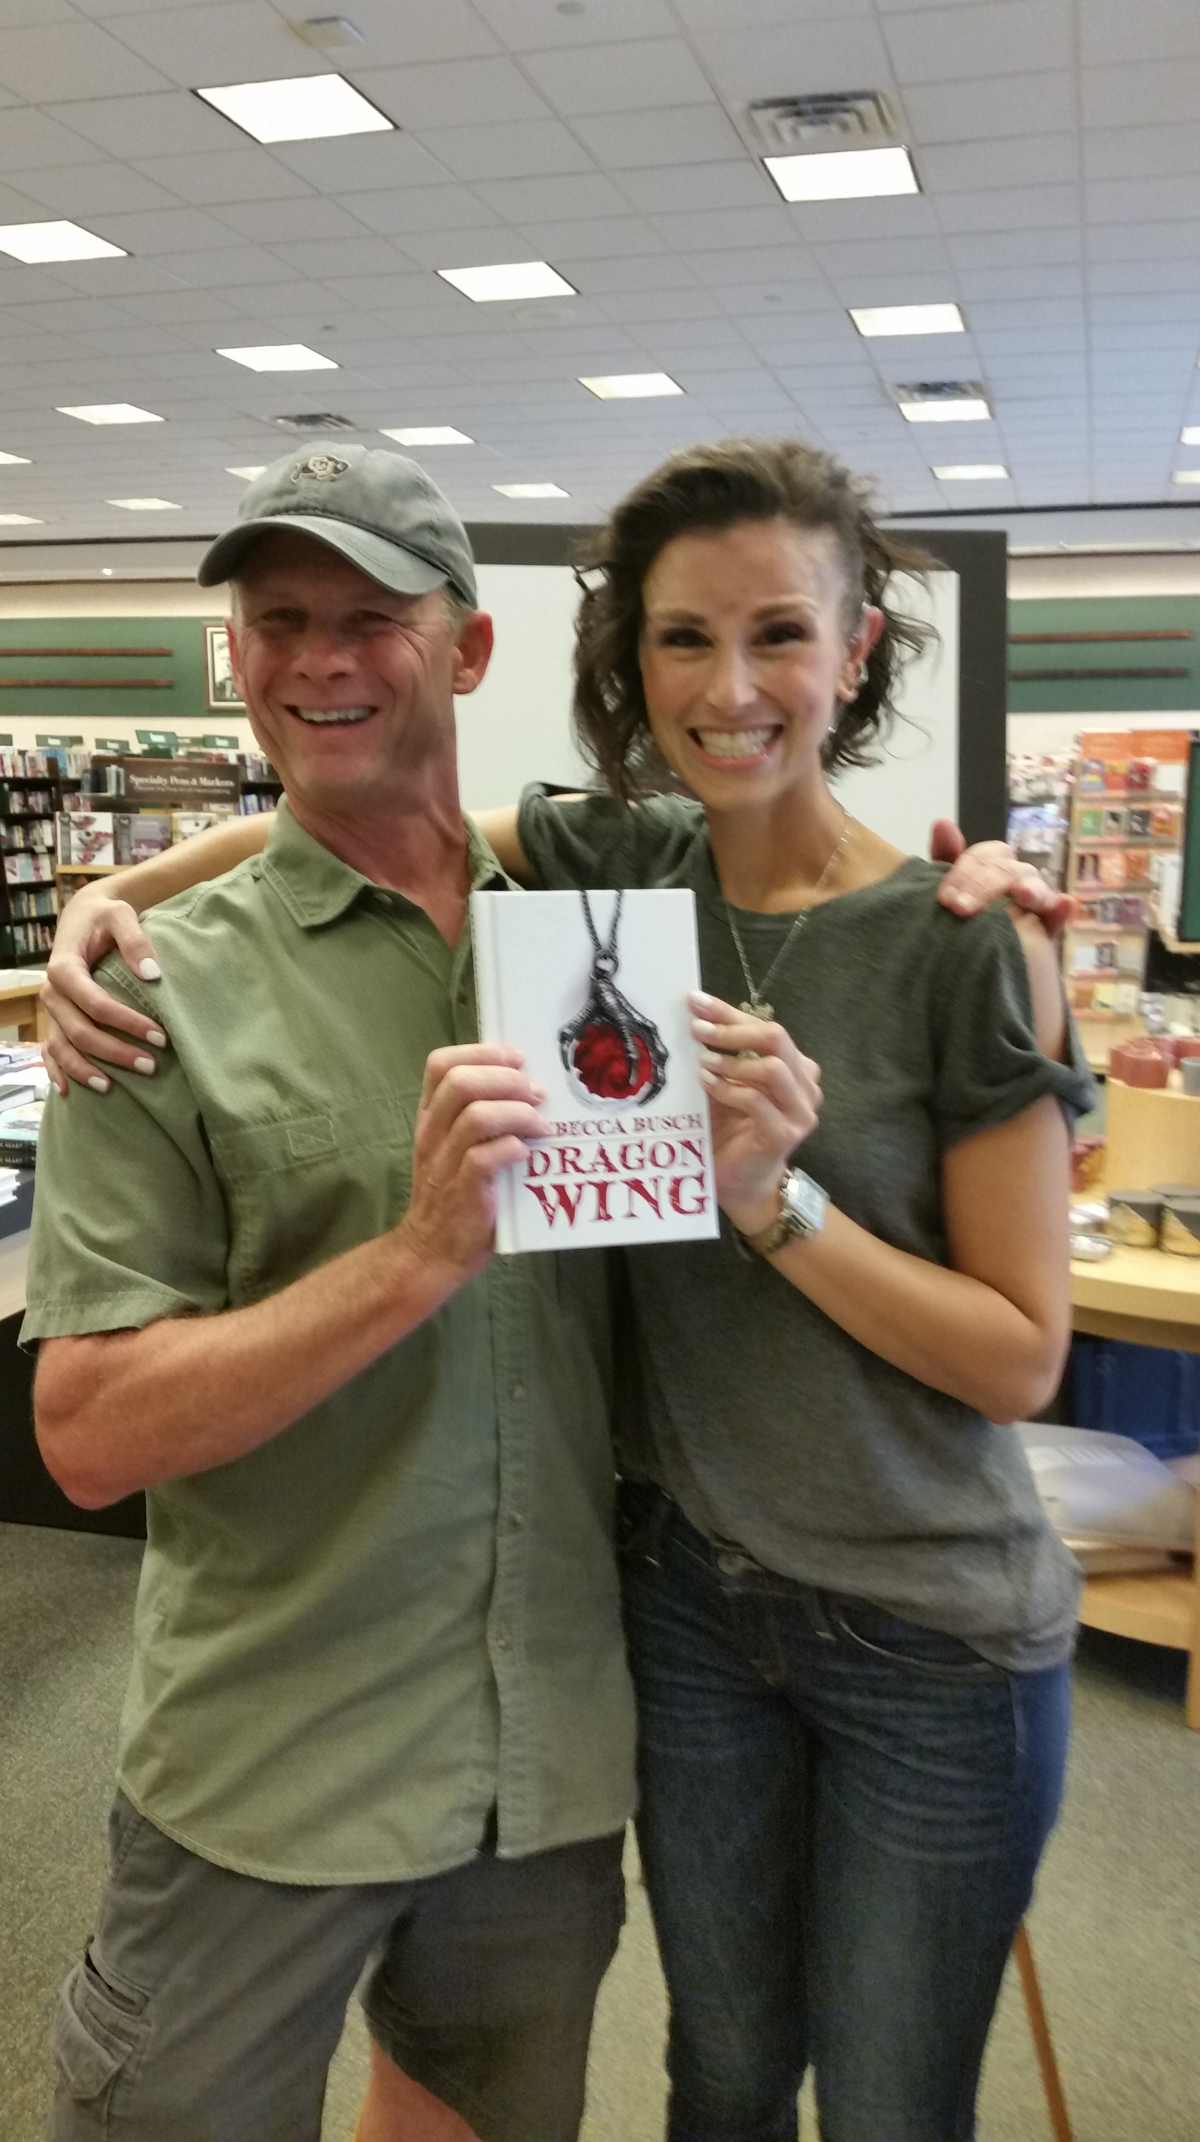 Book-Signing-9th-December-In-Georgetown-Colorado-Rebecca-K.-Busch-Dragon-wing-austin-macaulley-book-publisher-online